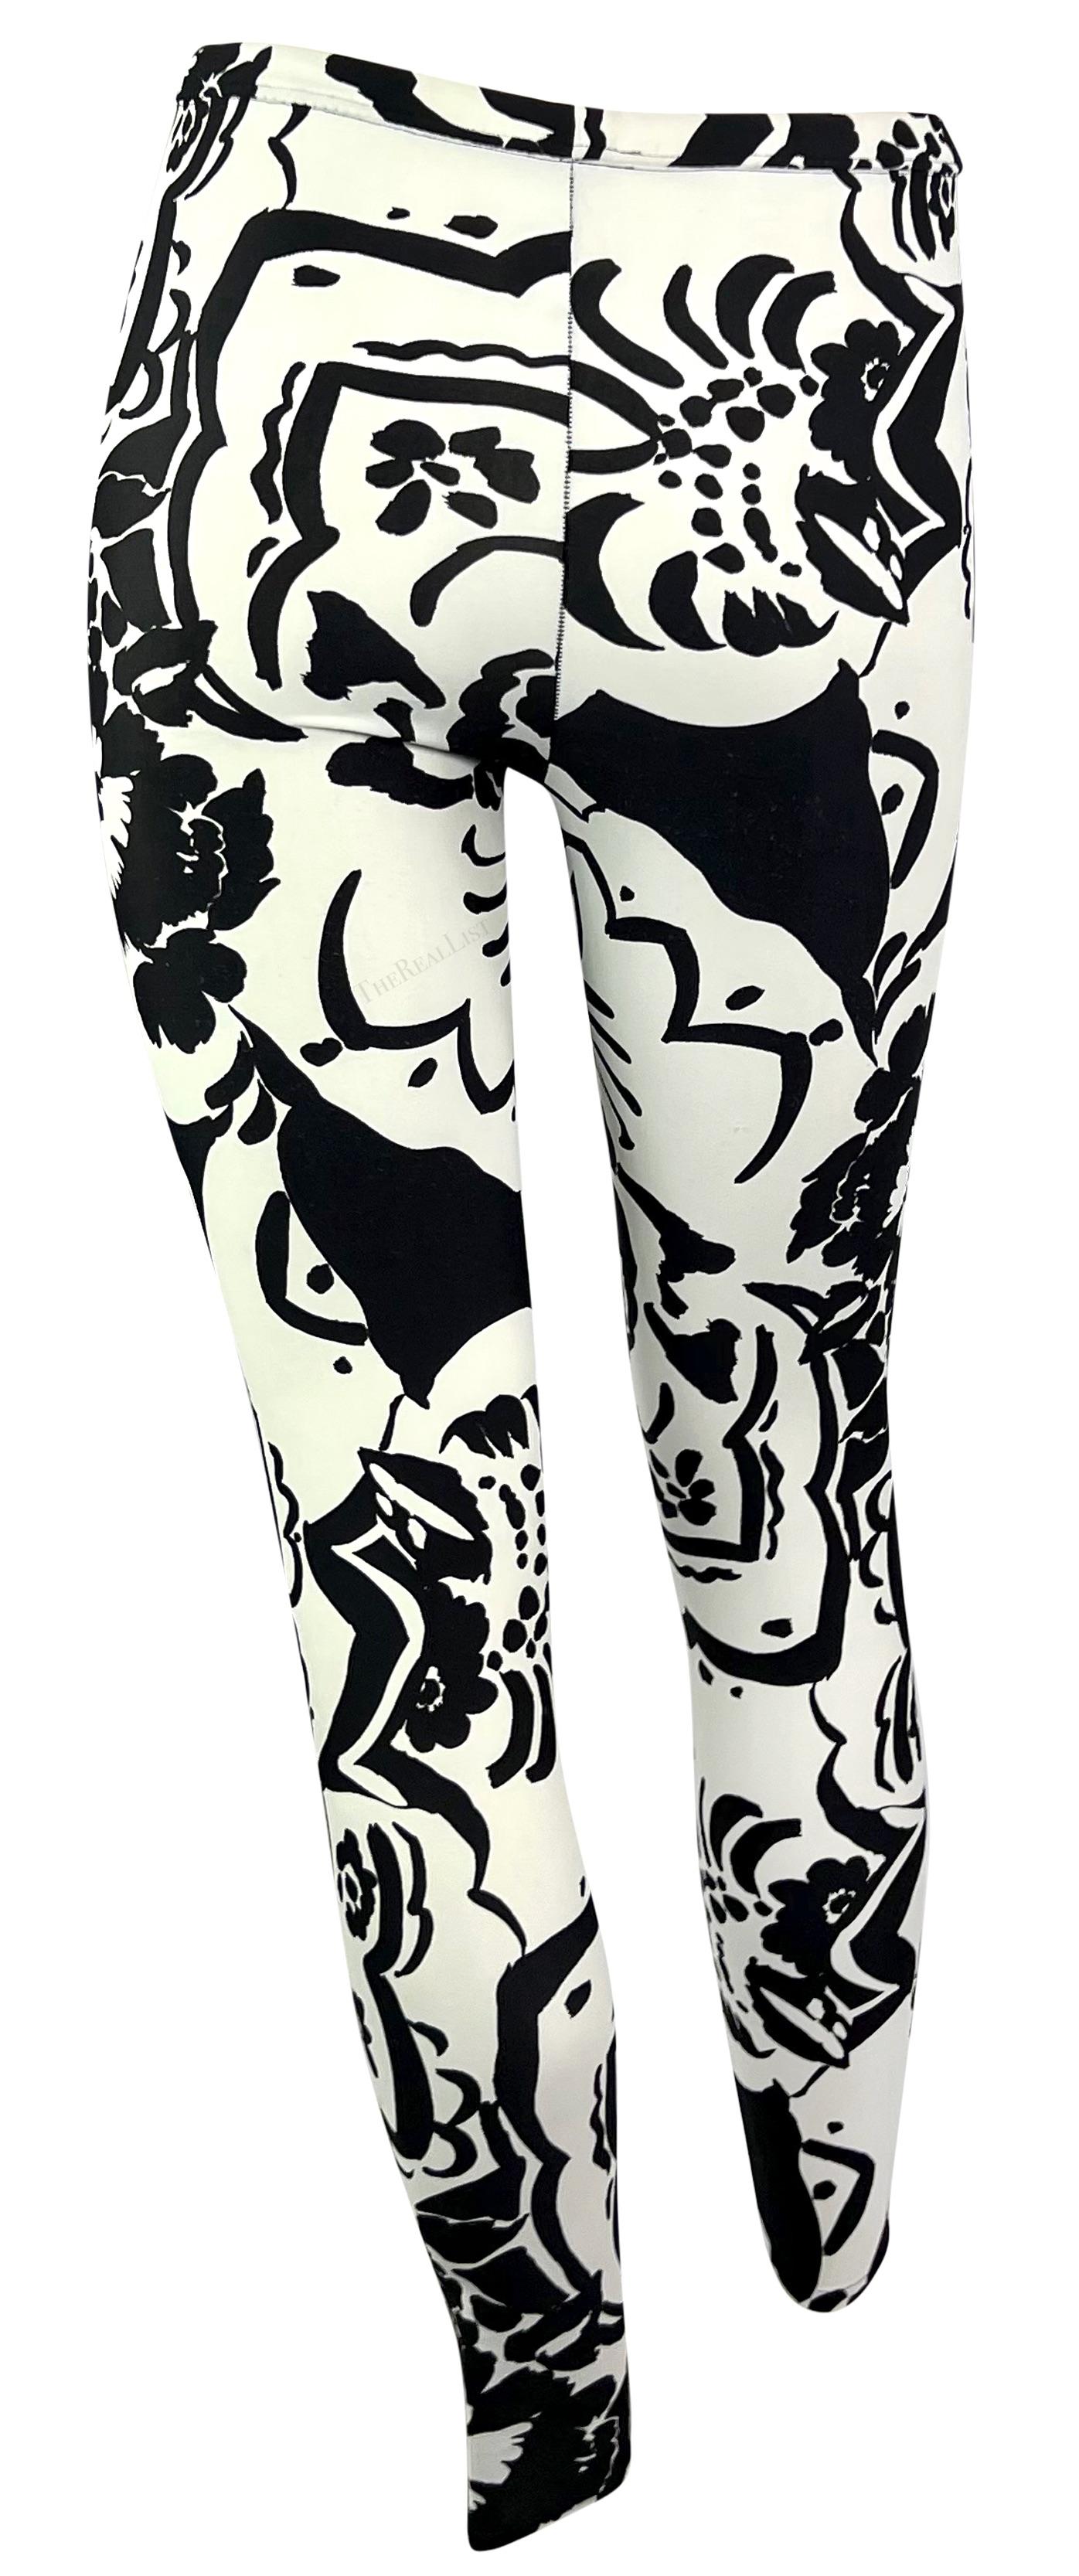 Women's 1990 Gianni Versace Black White Abstract Floral Leggings Tights For Sale